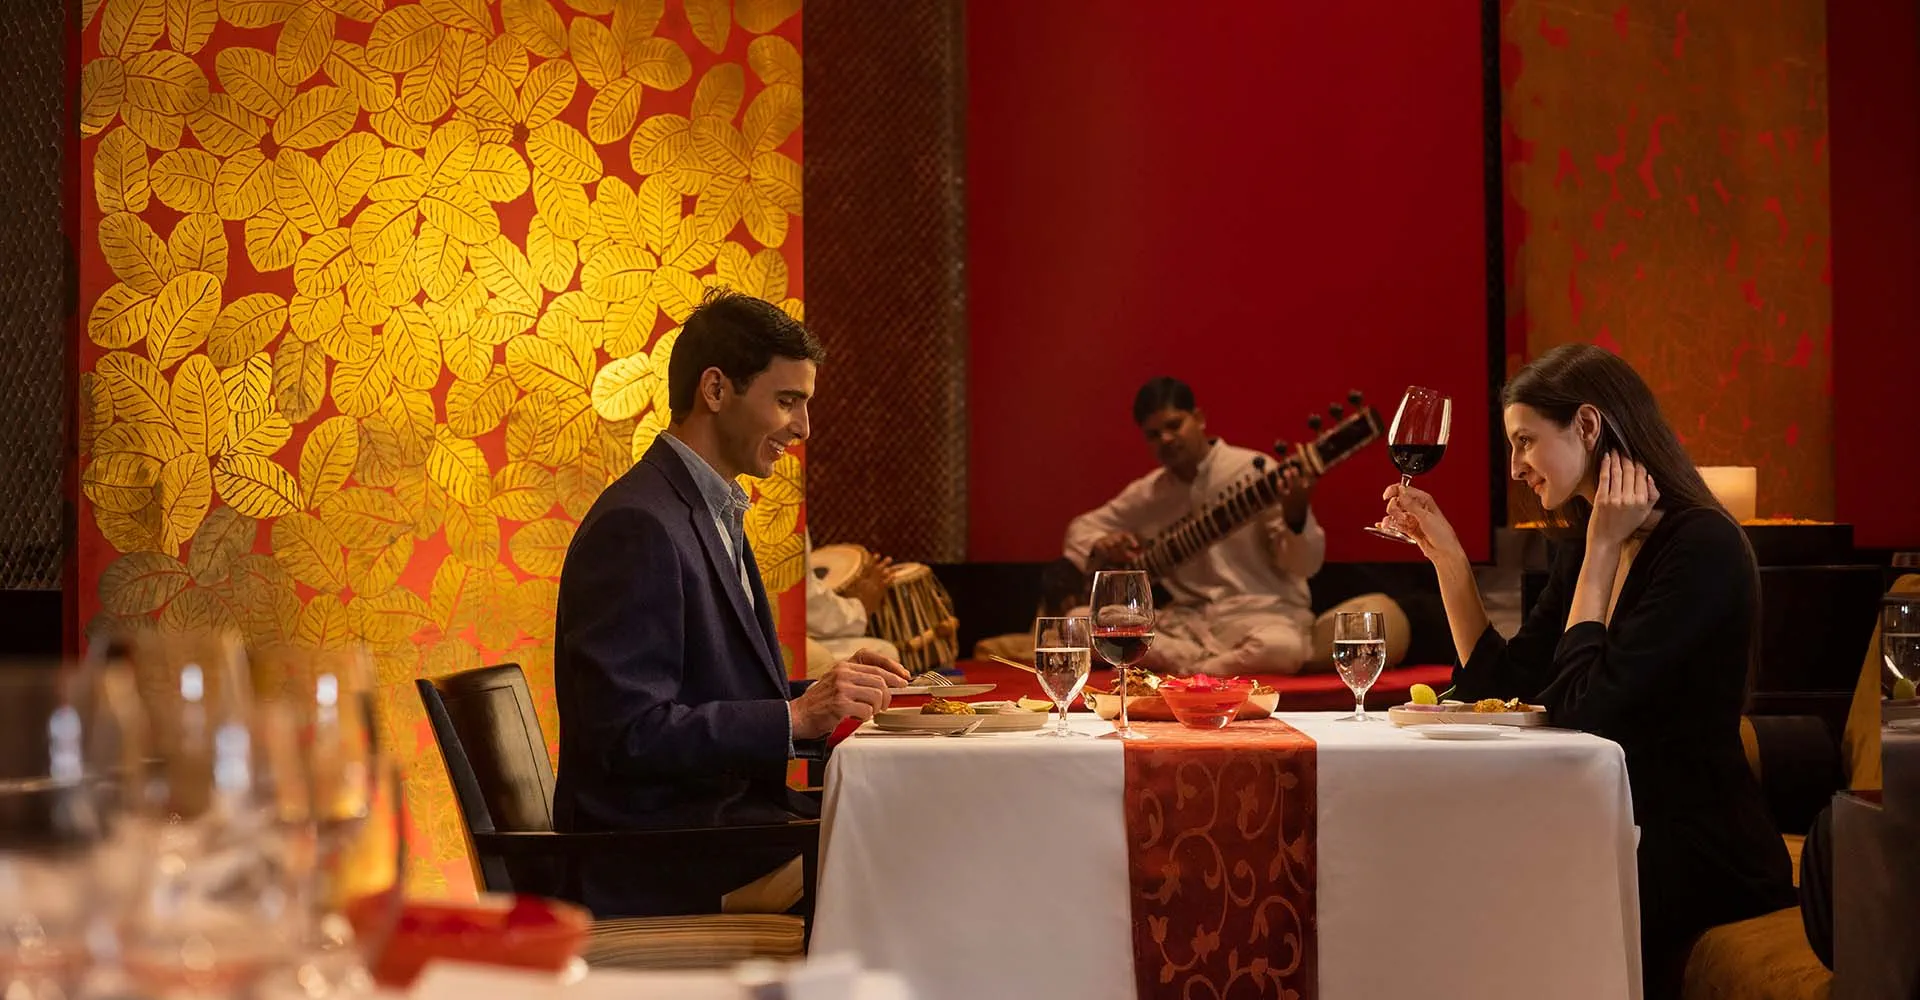 Saffron Restaurant At Trident Gurgaon With Indian Classical Music Paying At The Back